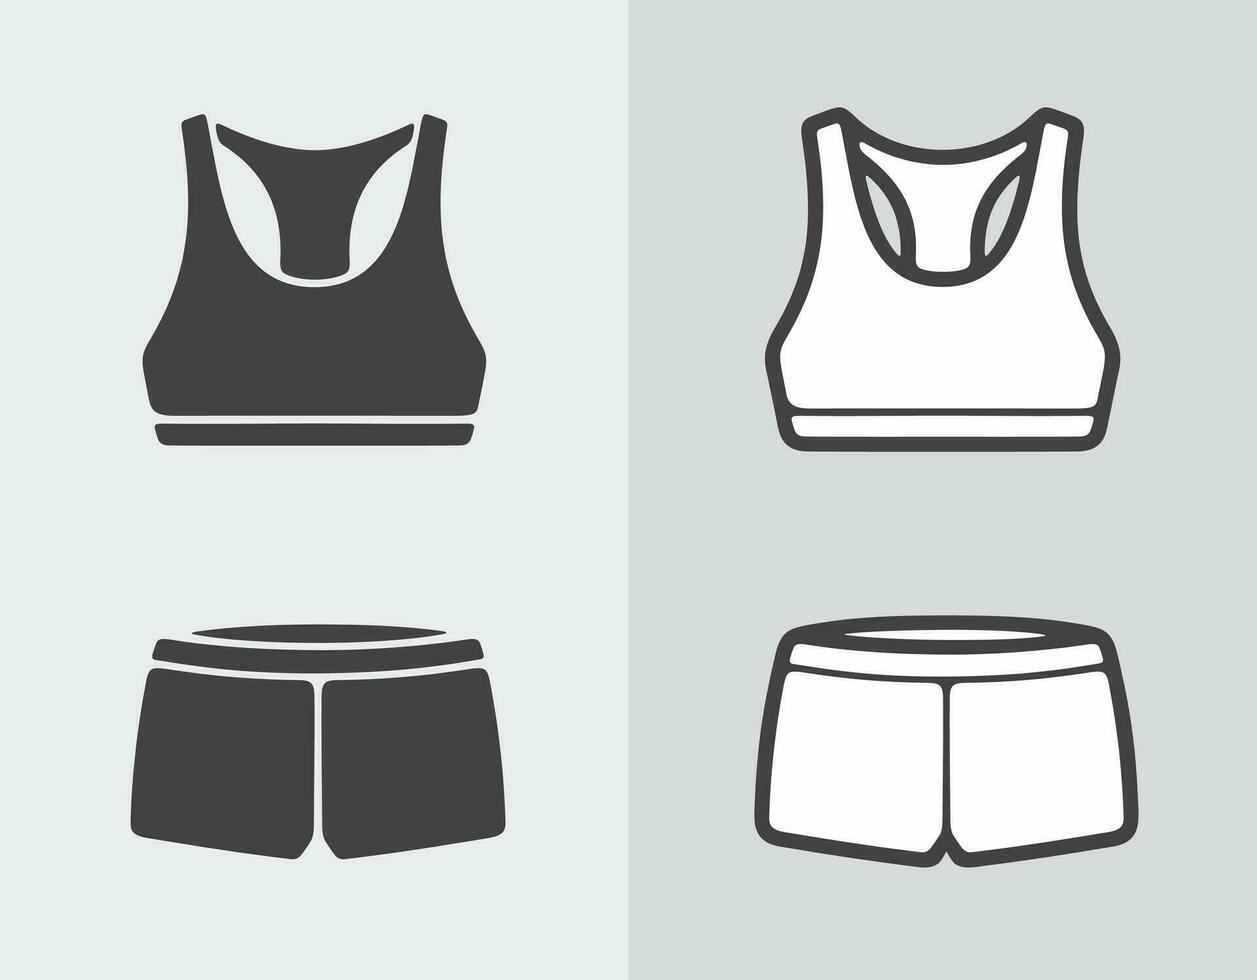 Women's sport underwear. Bra and boxer shorts. Clothes icon on a background. Vector illustration.